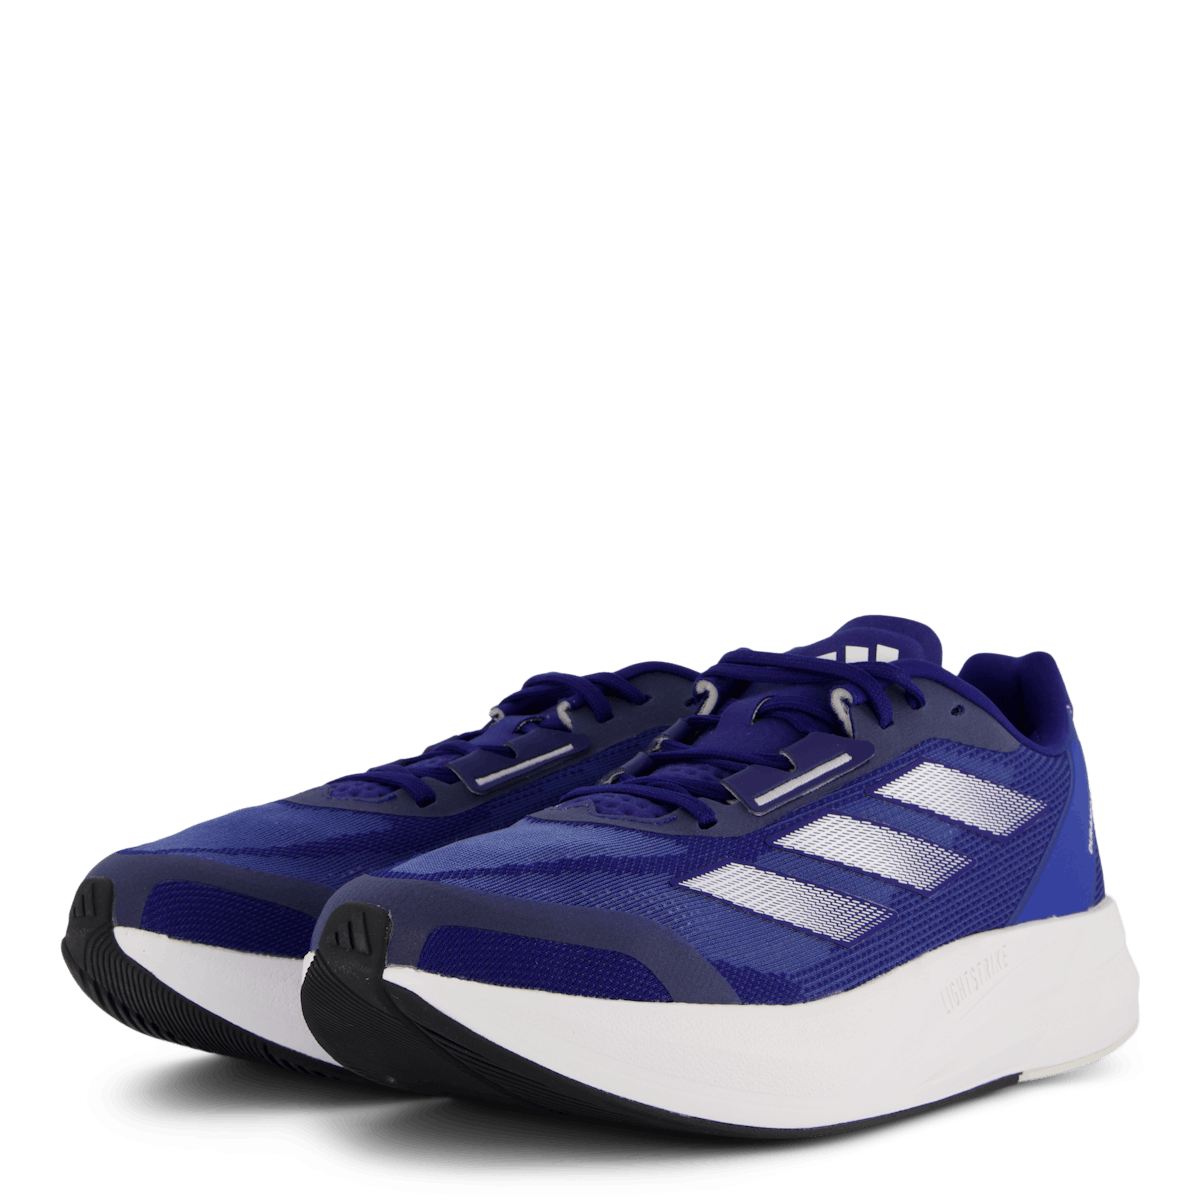 Duramo Speed Shoes Victory Blue / Cloud White / Bright Royal